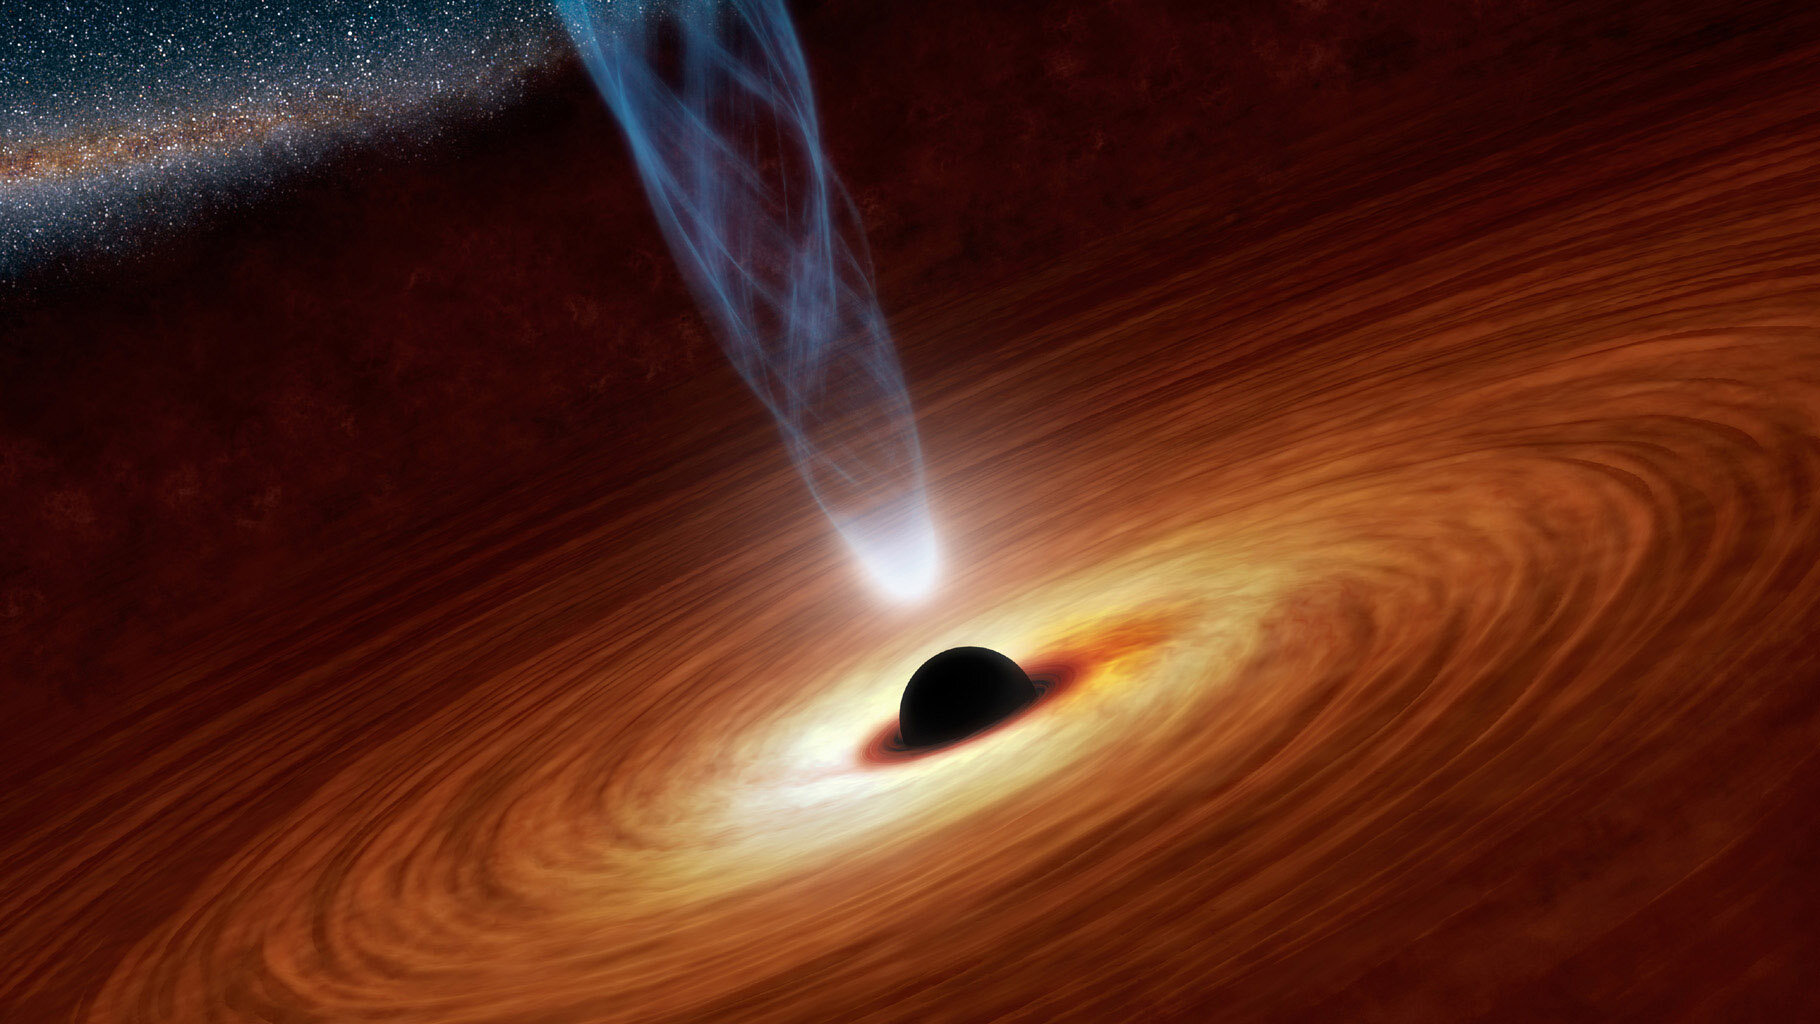 Astronomers just found the oldest supermassive black hole at this point